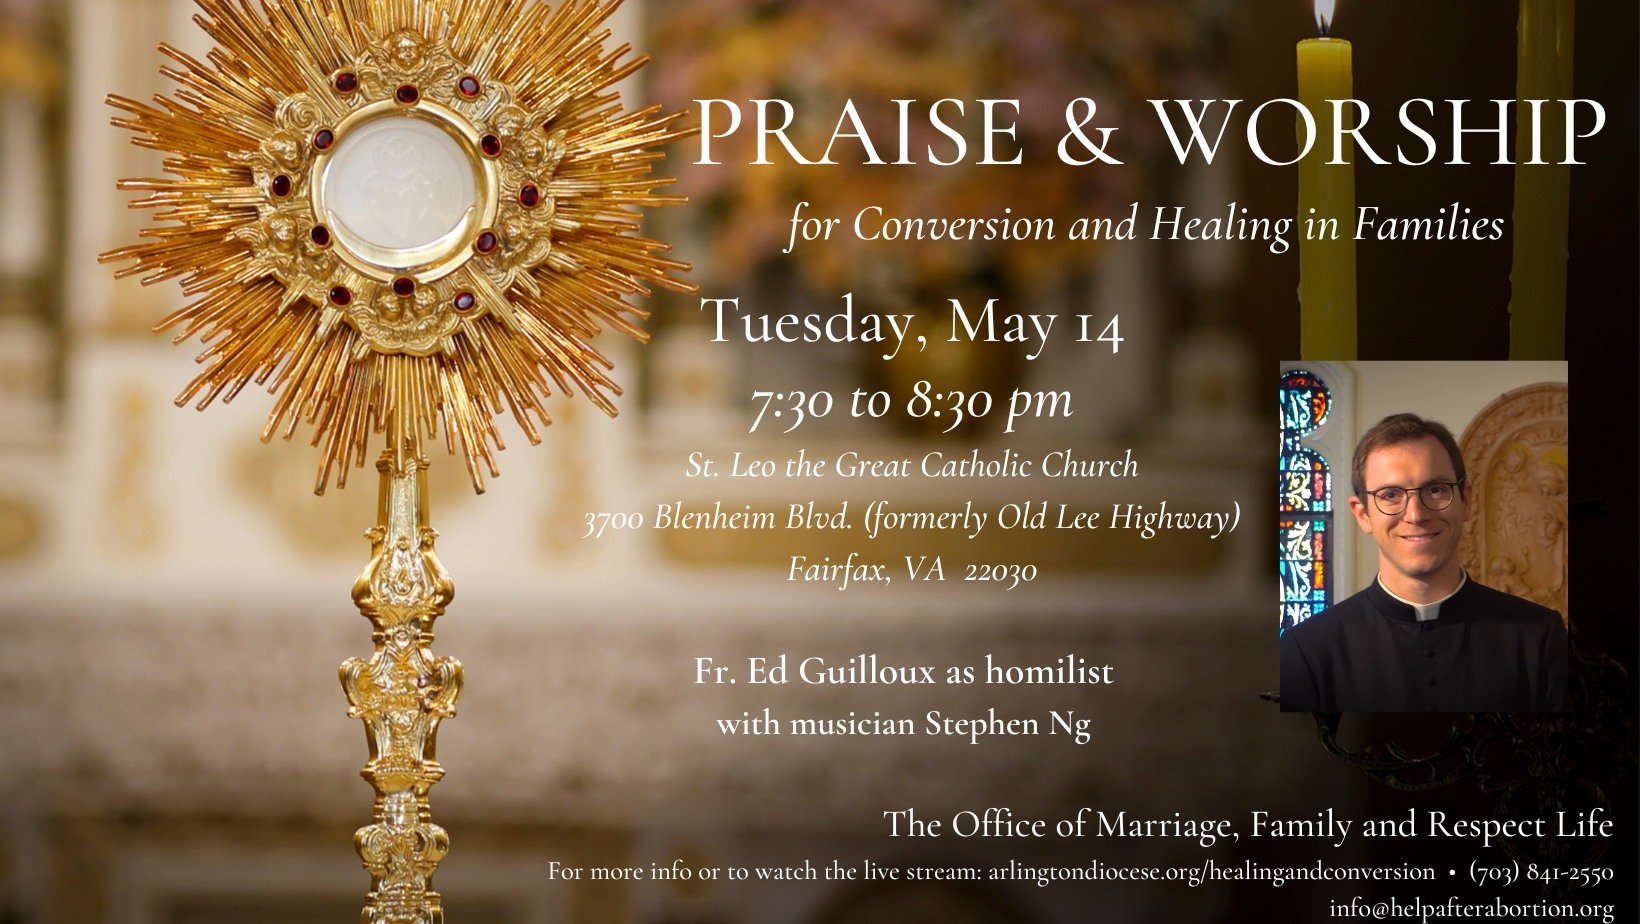 Praise &amp; Worship with Father Ed Guilloux and musicians Valerie &amp; Rocco Repetski
in person or via live stream! Tonight: Tuesday, May 14 from 7:30 to 8:30 pm 
St. Leo the Great Catholic Church
3700 Blenheim Blvd (formerly Old Lee Highway)
Fairf